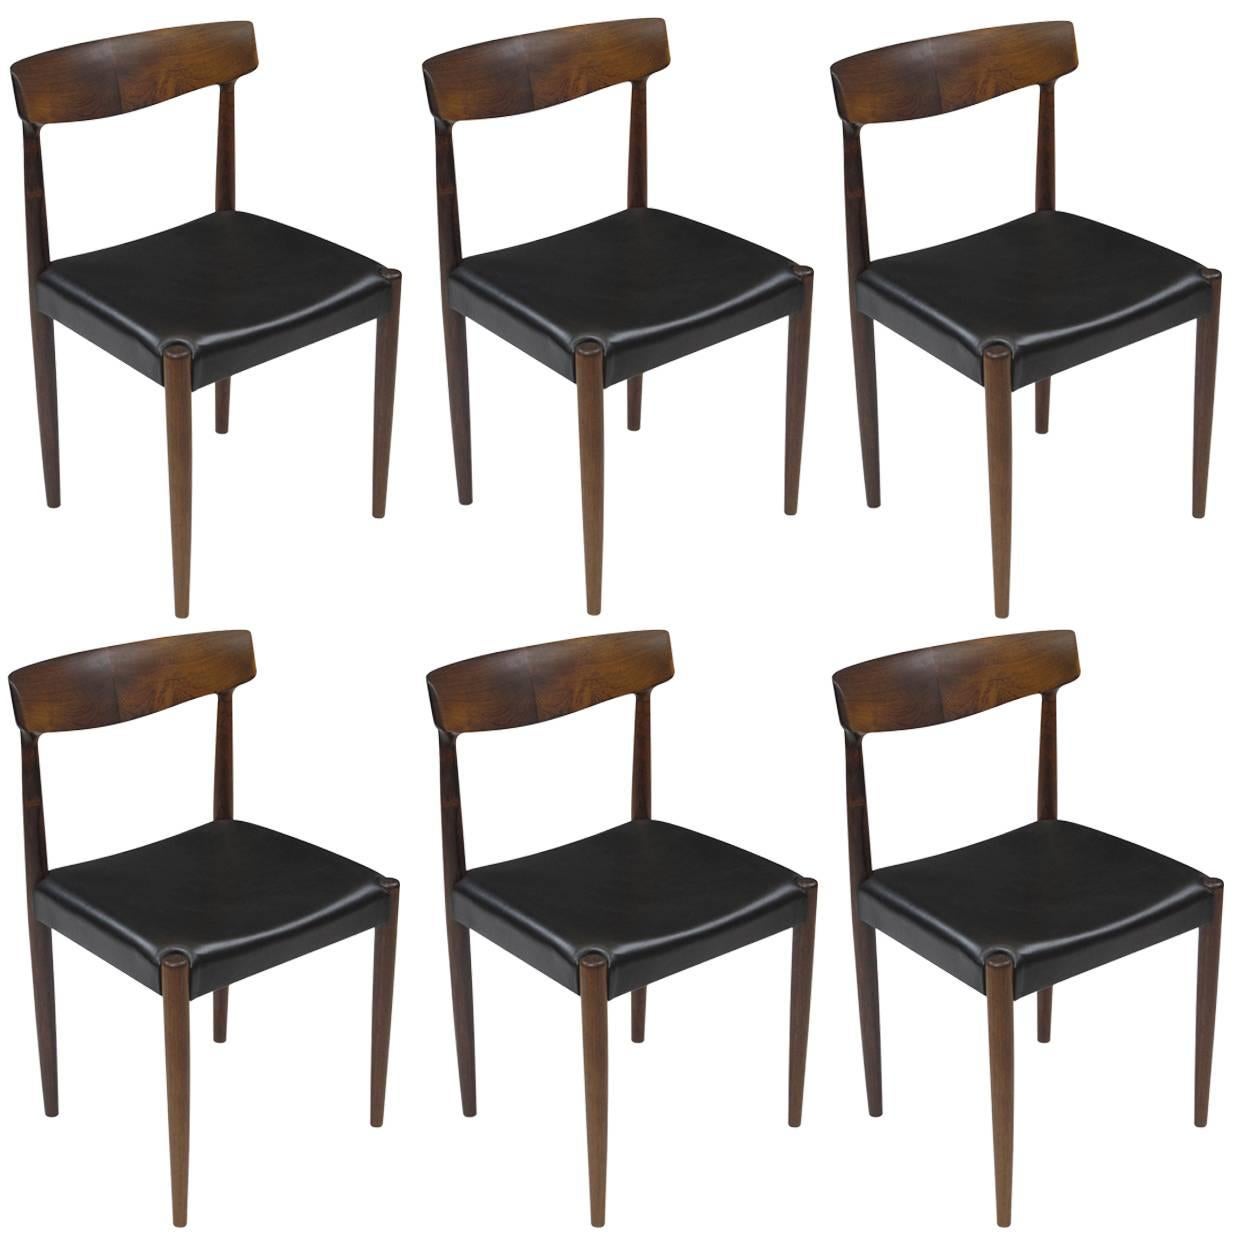 Knud Faerch Danish Rosewood Dining Chairs For Sale